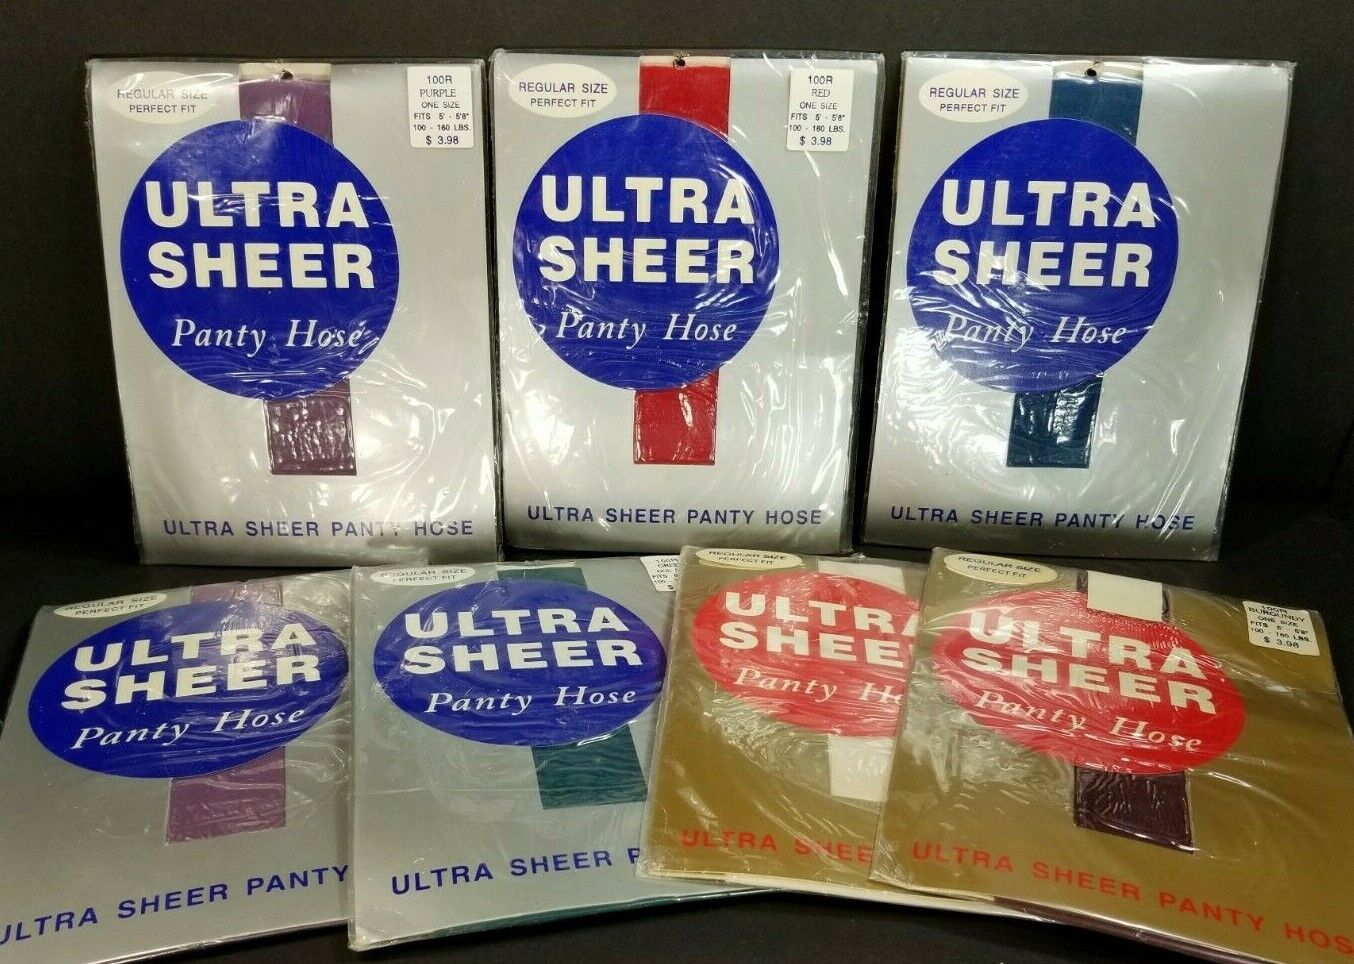 Vintage 80s Lot of 6 Ultra Sheer Panty Hose in Assorted Colors Regular Size 100R Ultra Sheer Does Not Apply - фотография #2